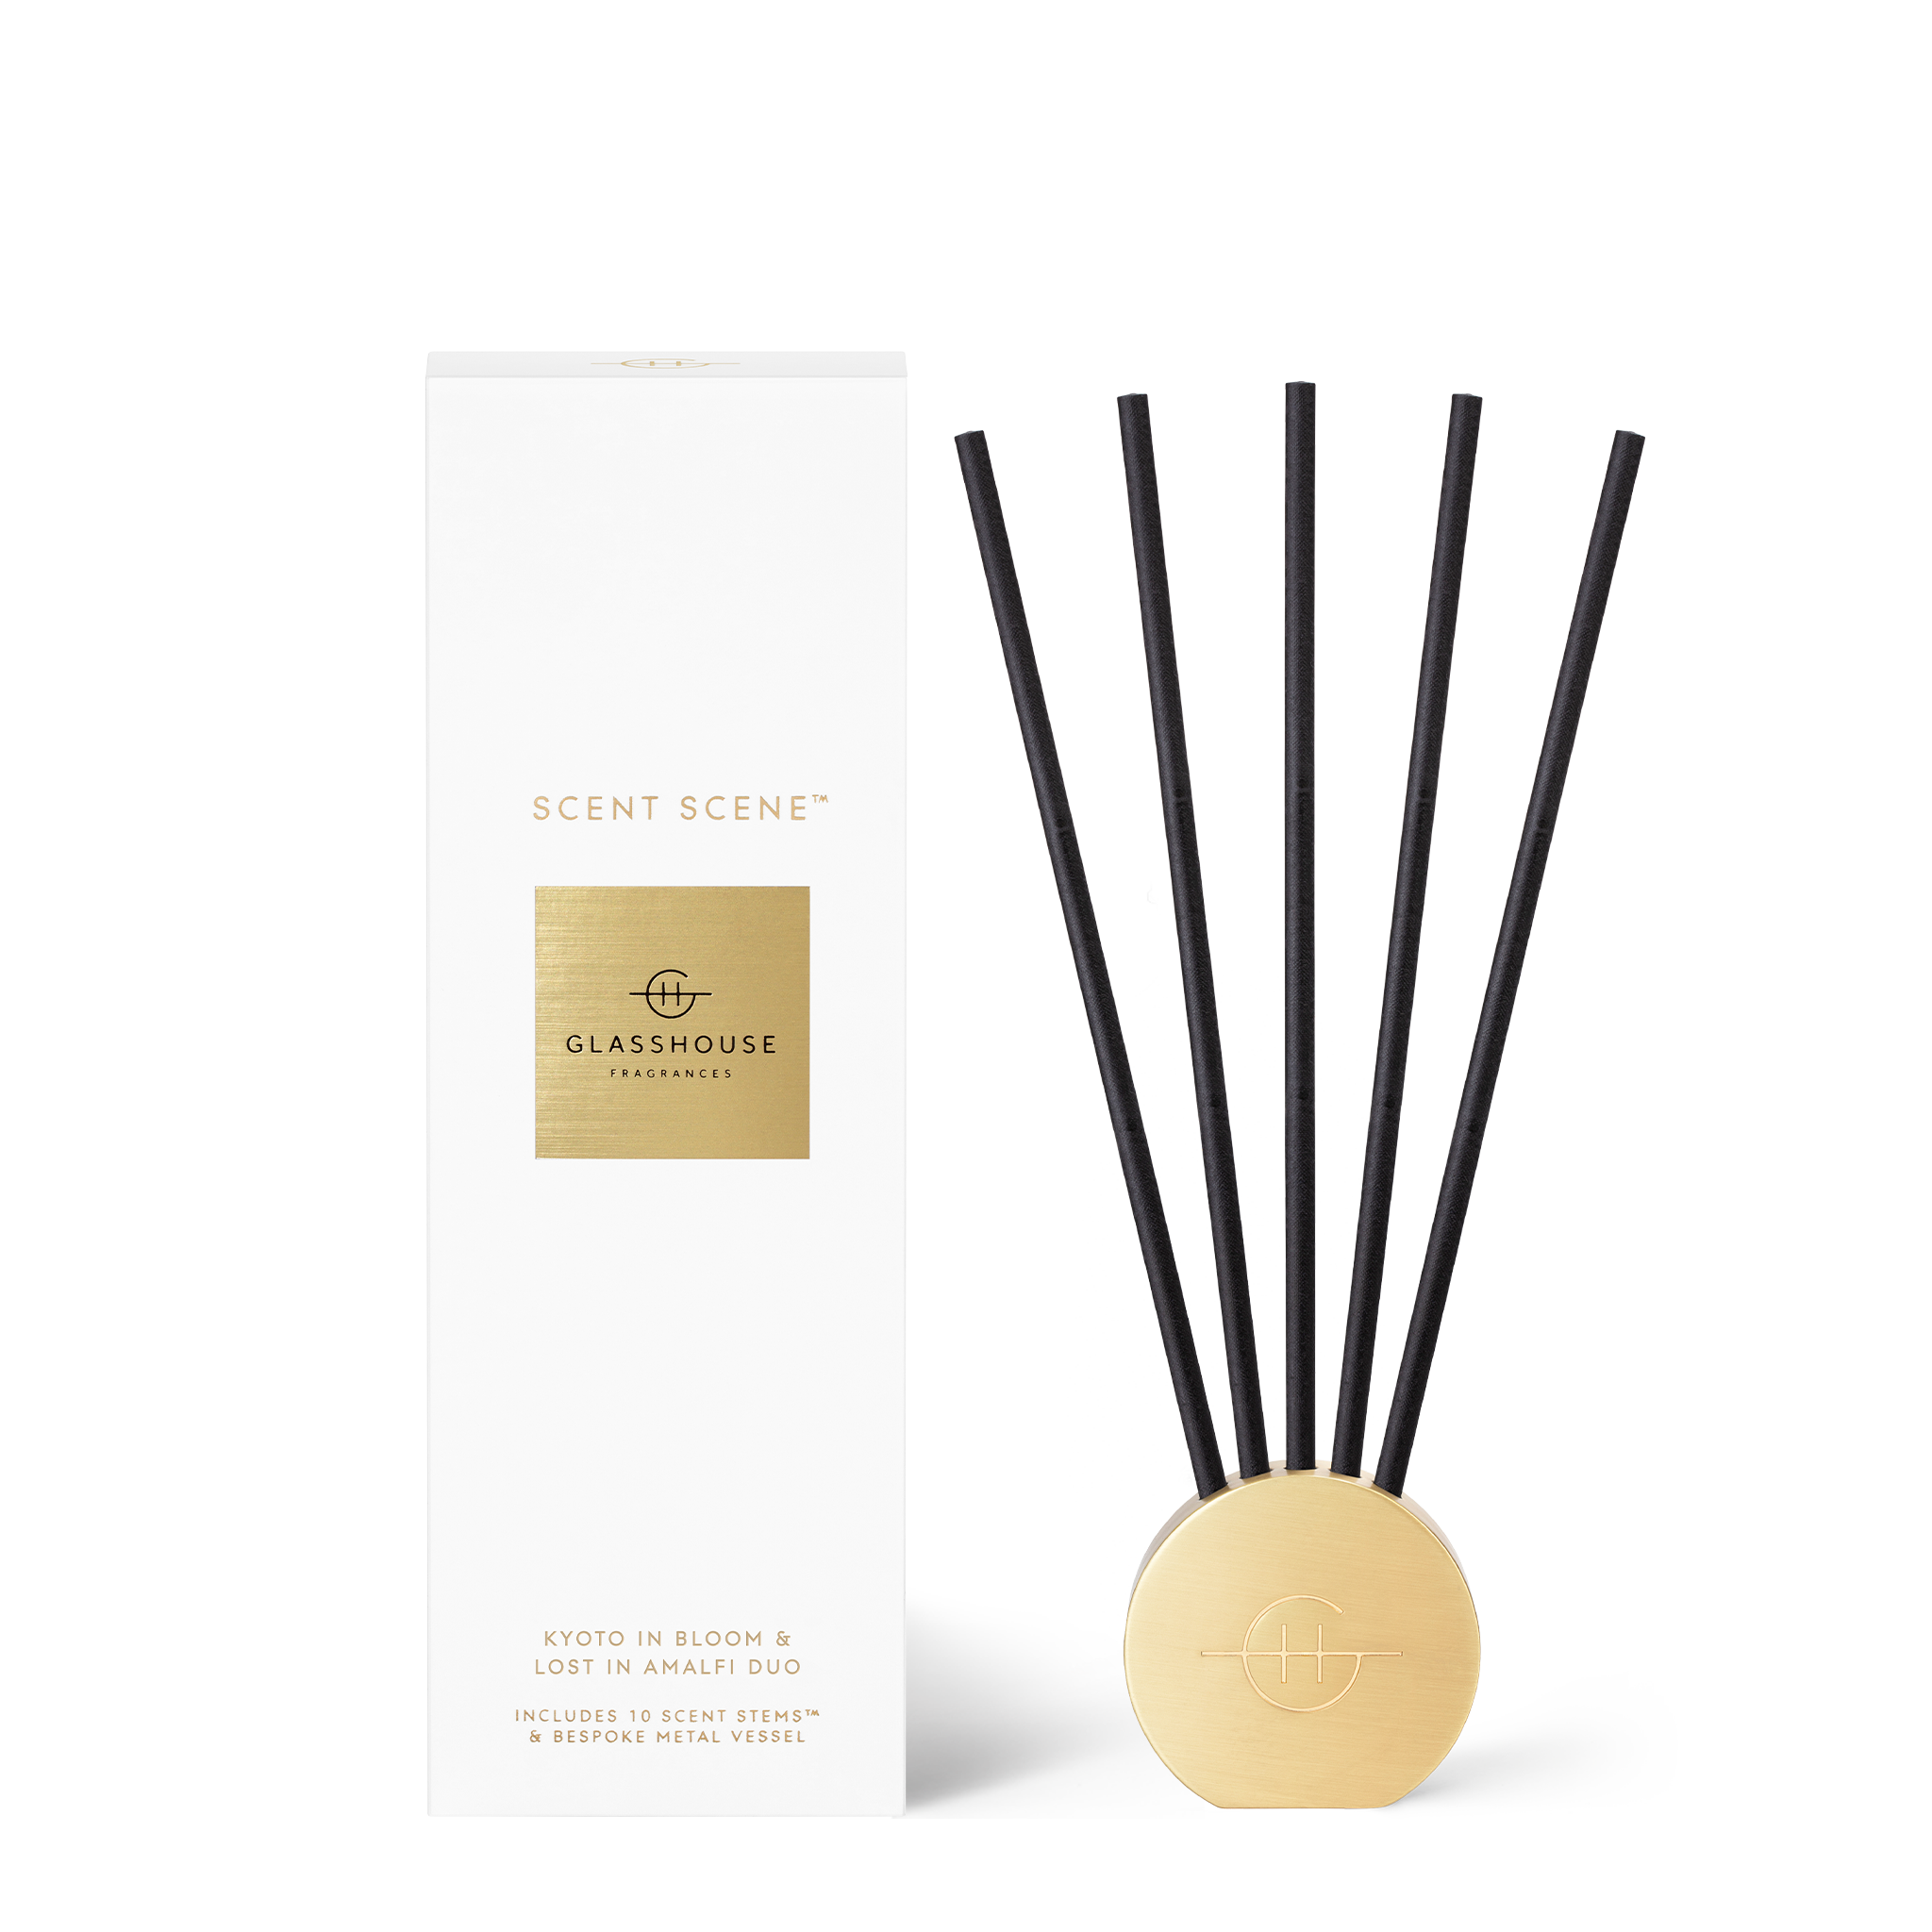 Glasshouse Fragrances Kyoto in Bloom and Lost in Amalfi Scent Scene™ Liquidless Diffuser stand and stems with white box